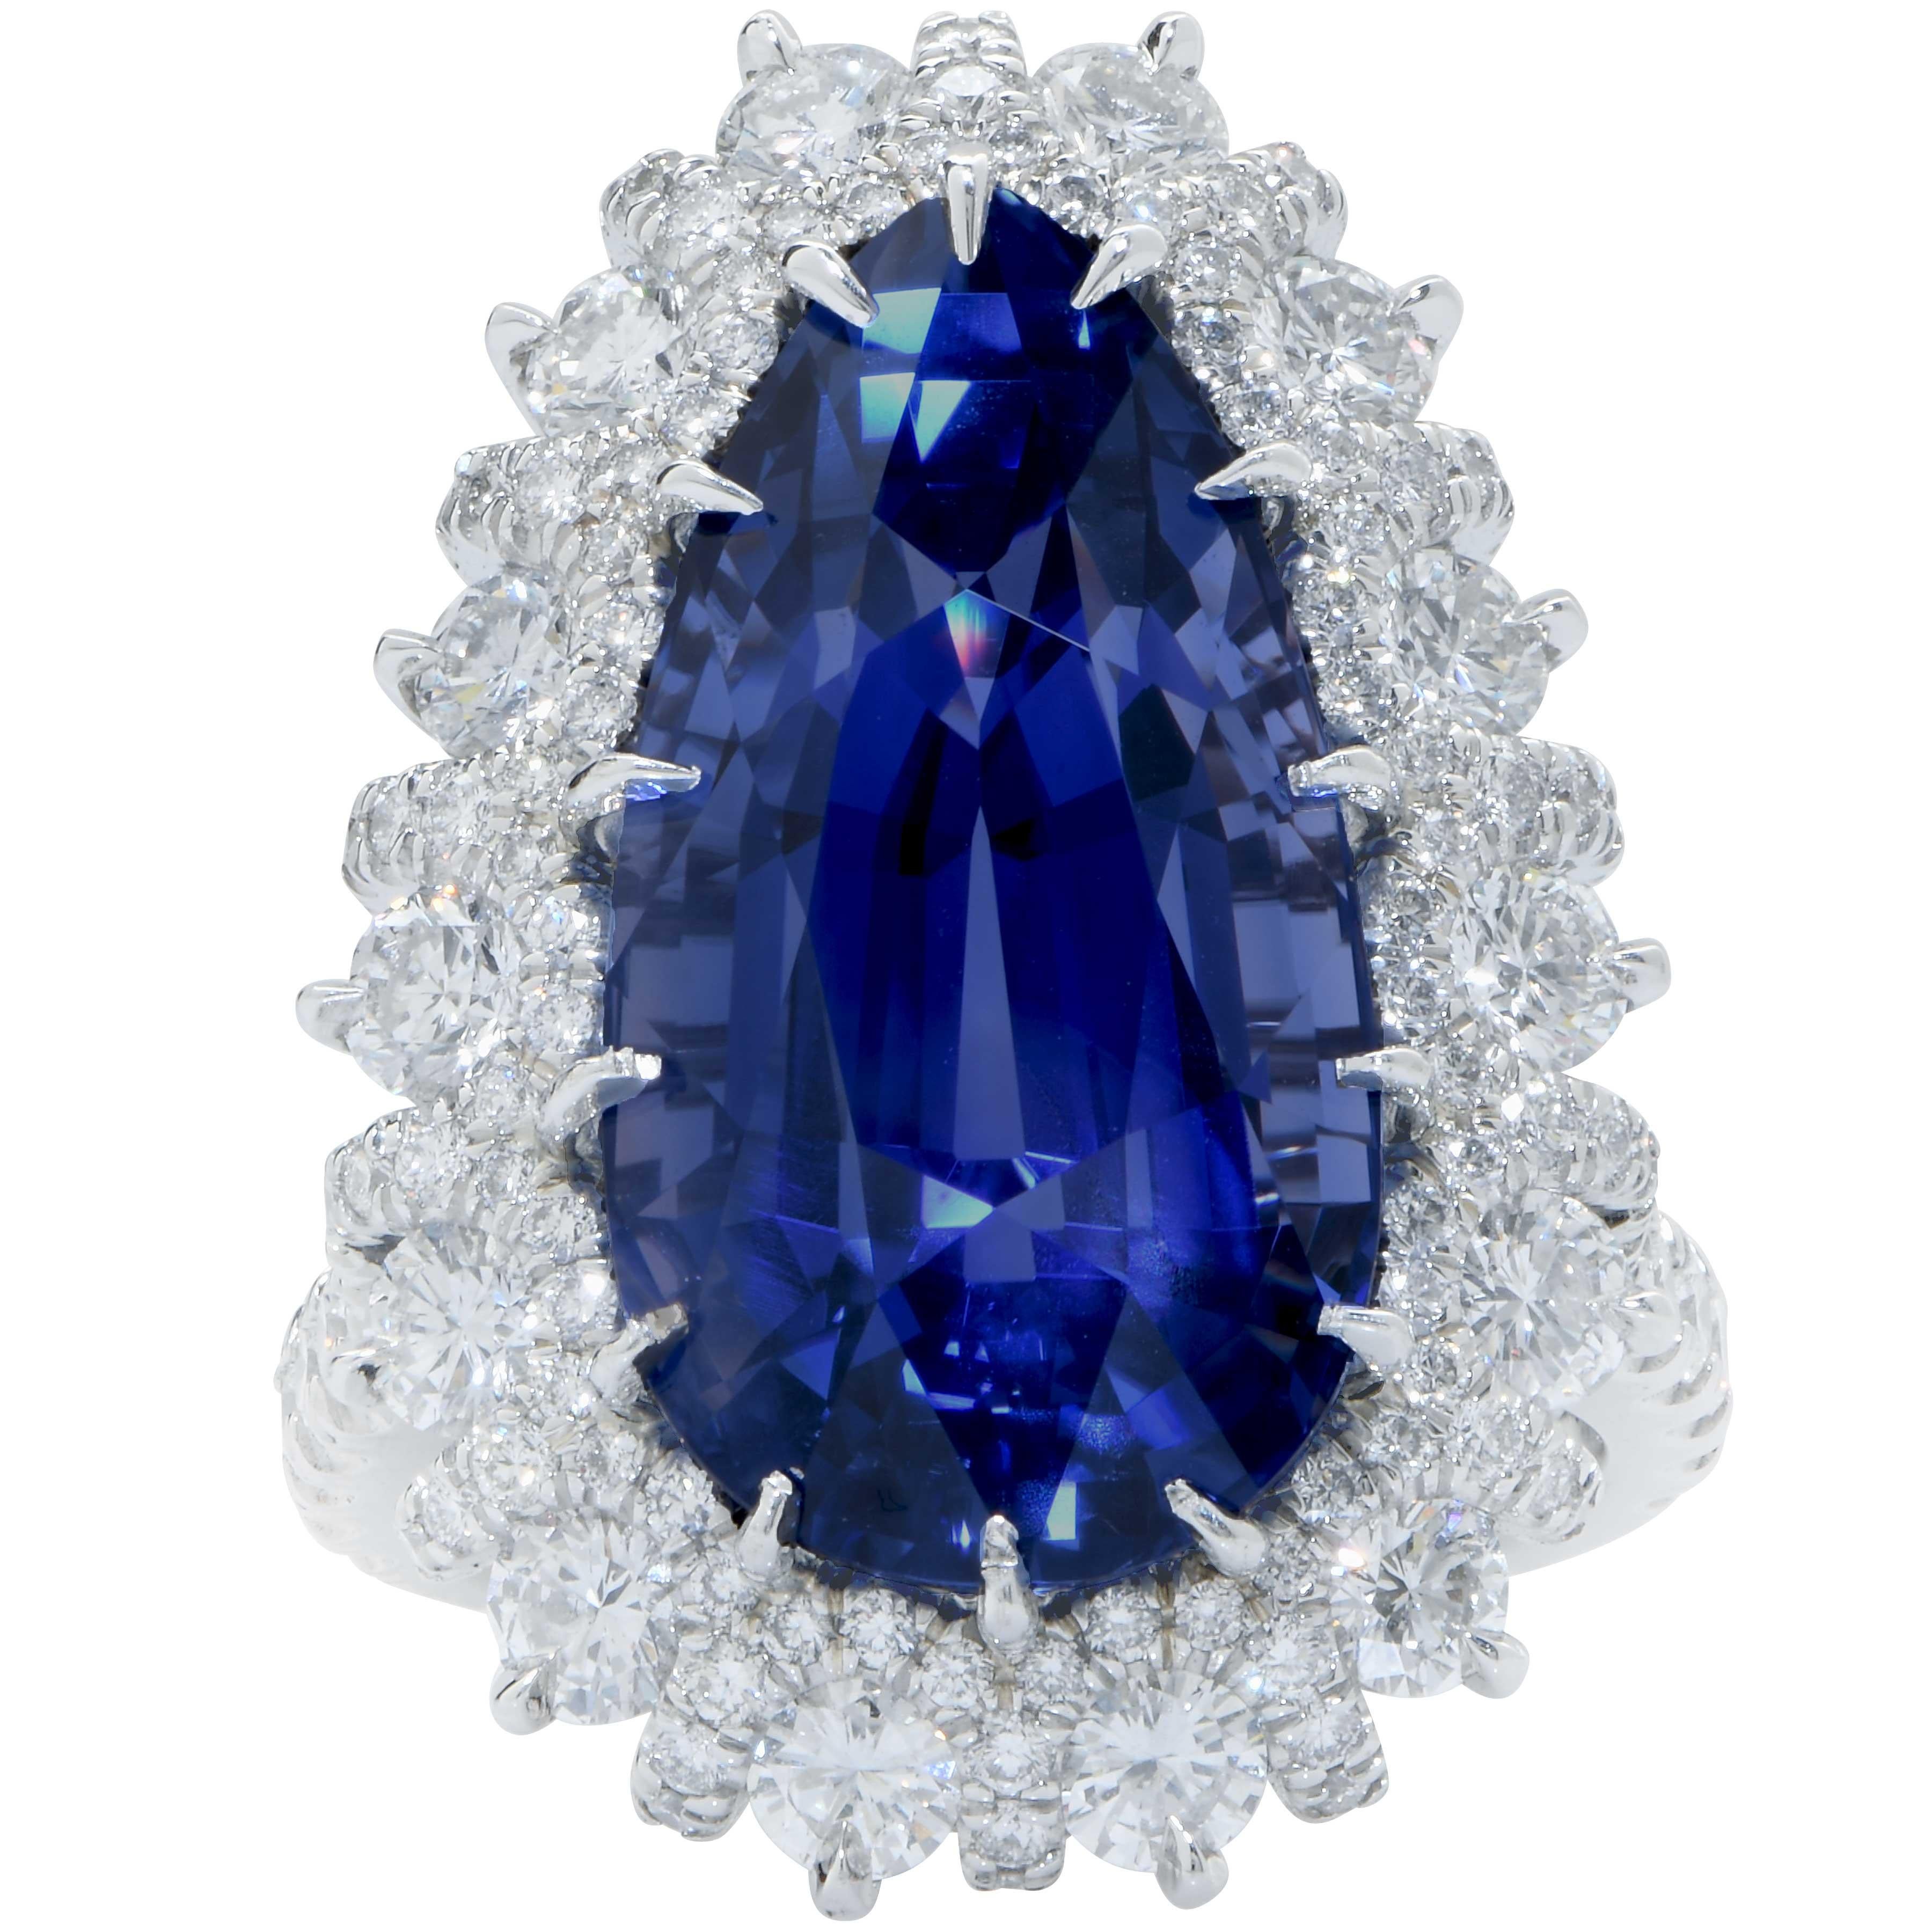 Modern Important 19 Carat AGL Graded Pear Shaped Sapphire and Diamond Ring For Sale